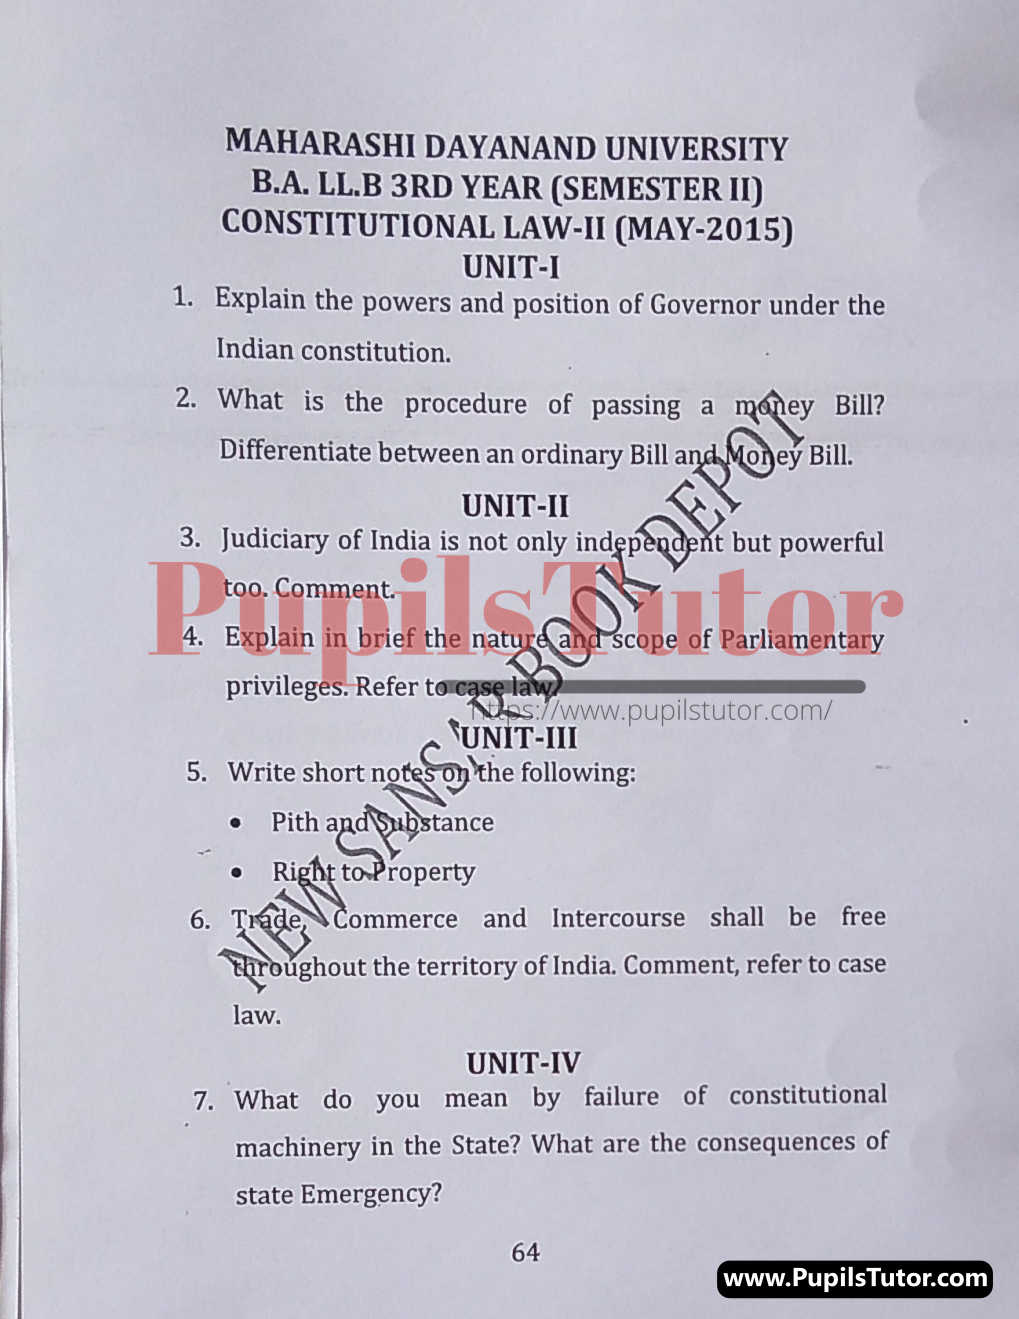 MDU (Maharshi Dayanand University, Rohtak Haryana) LLB Regular Exam (Hons.) Second Semester Previous Year Constitutional Law - 2 Question Paper For May, 2015 Exam (Question Paper Page 1) - pupilstutor.com